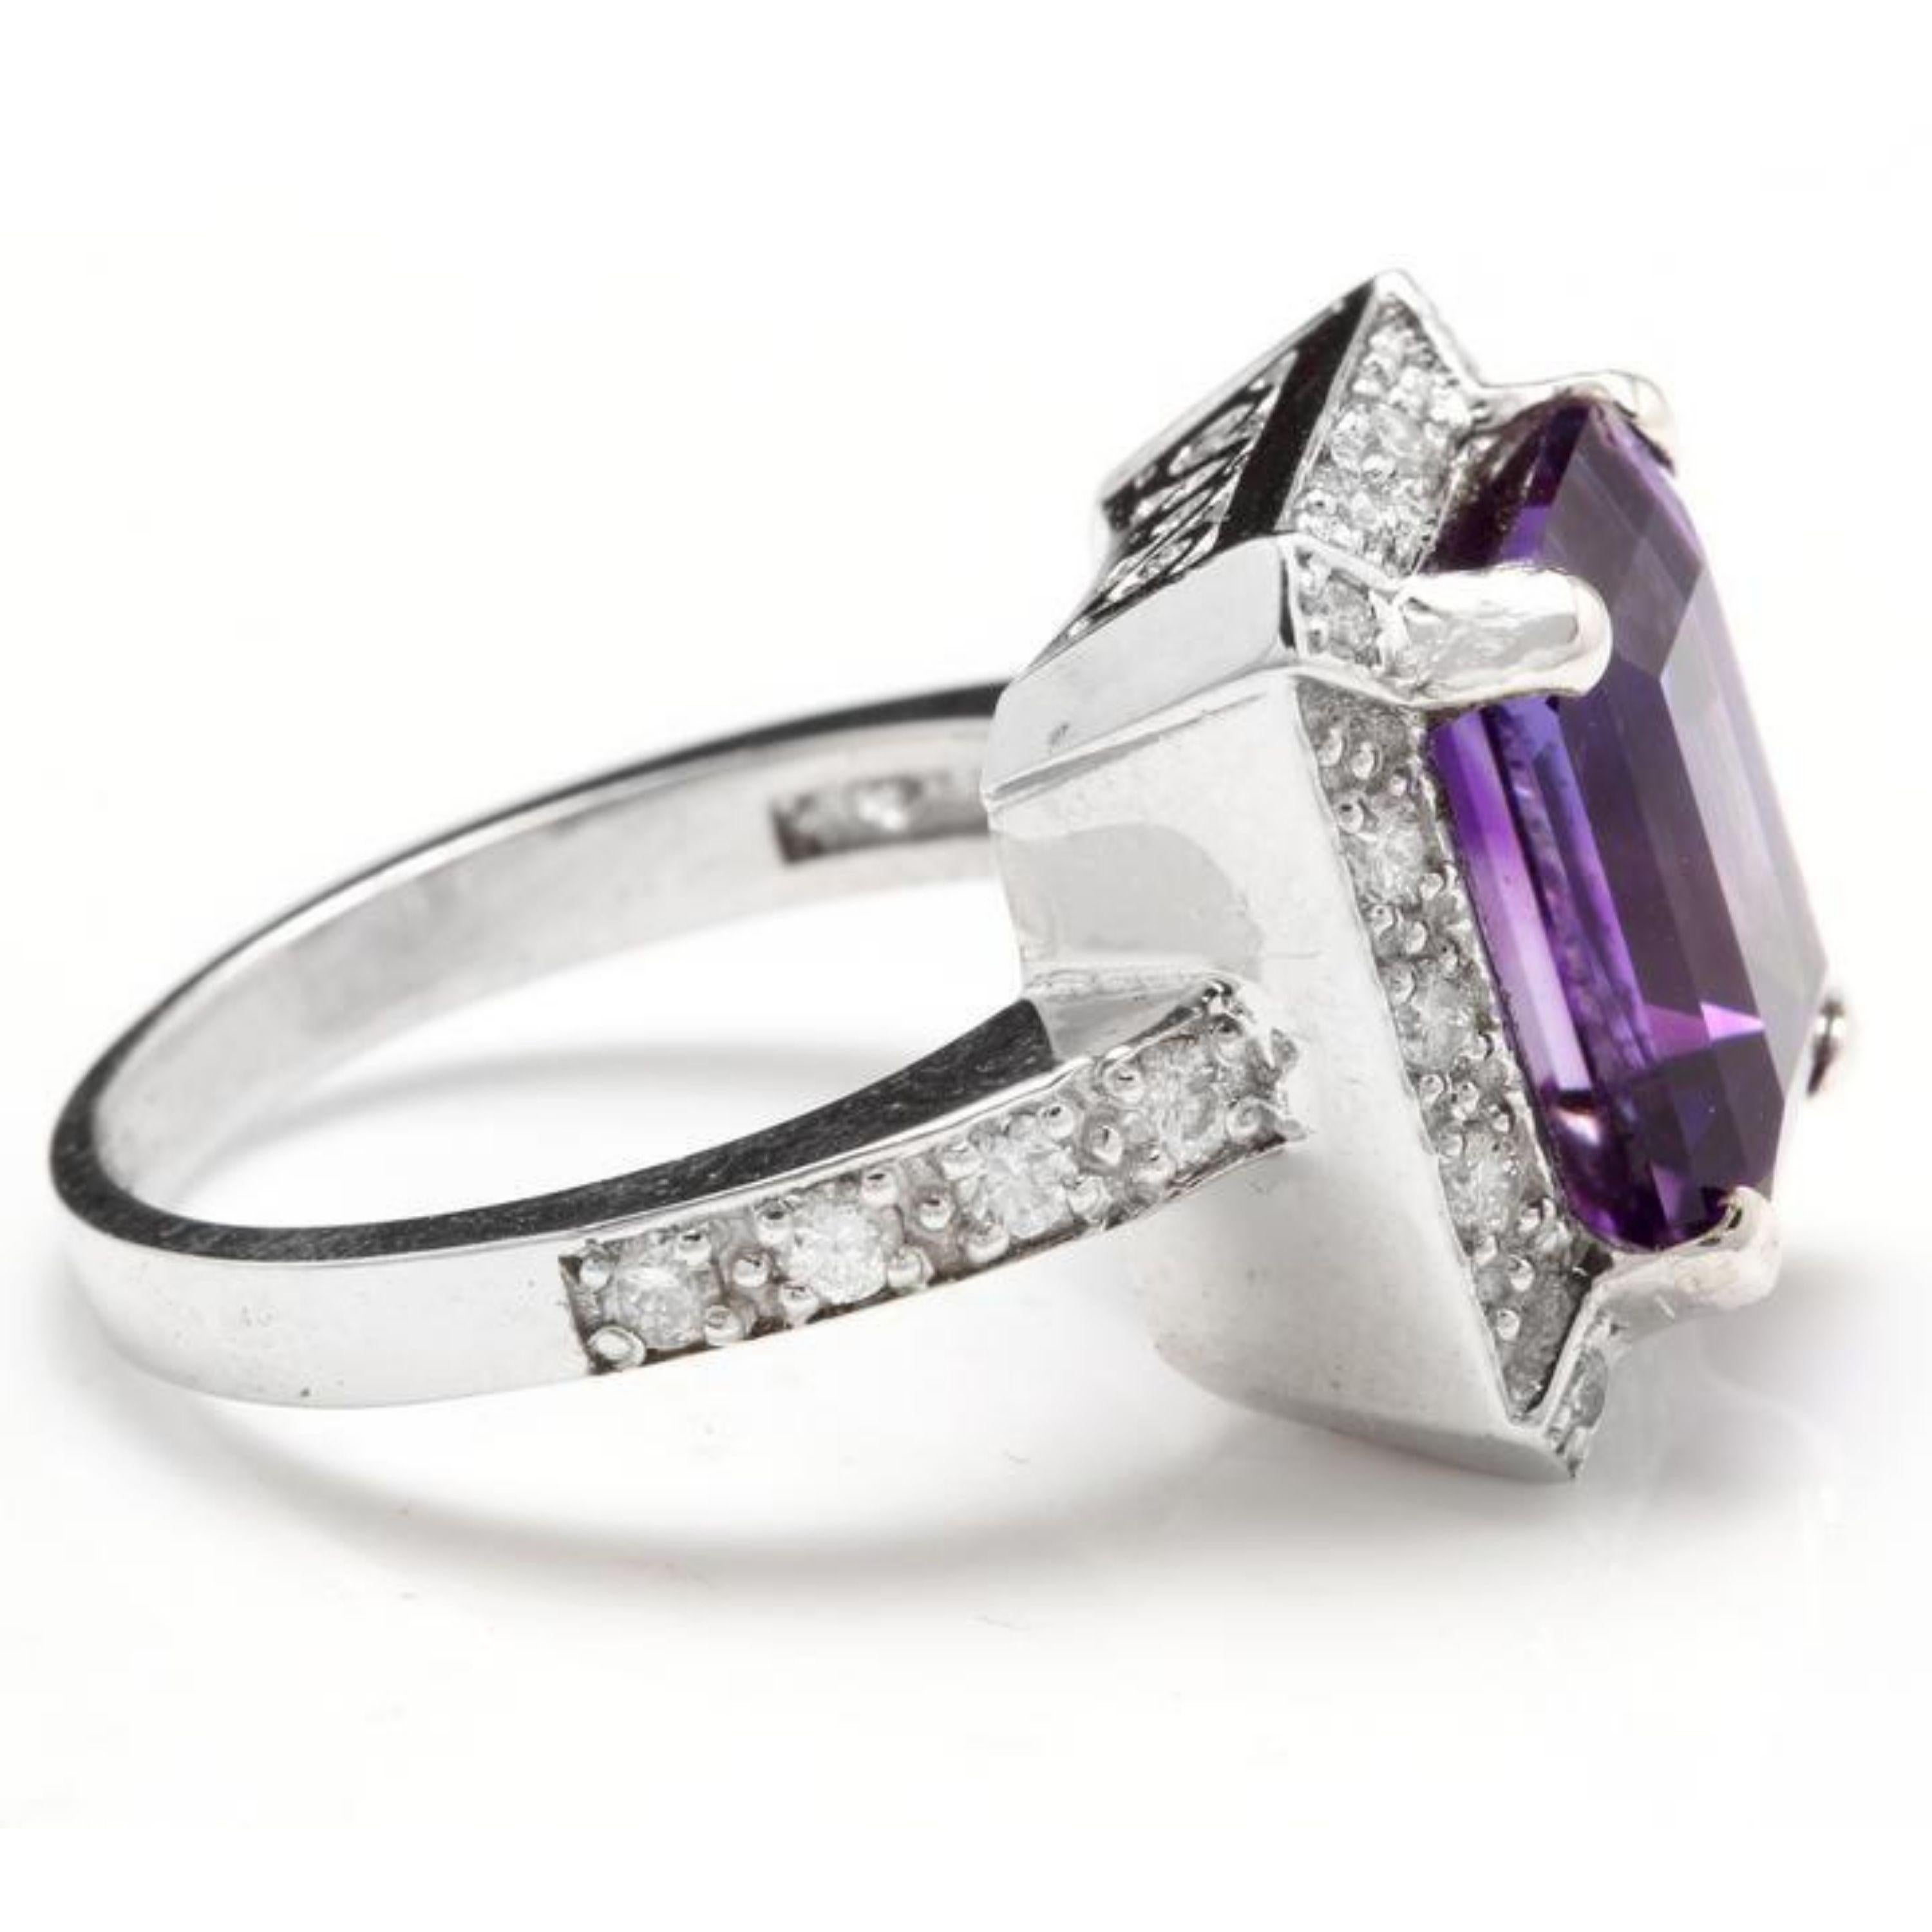 Mixed Cut 6.05 Carat Impressive Natural Amethyst and Diamond 14 Karat White Gold Ring For Sale